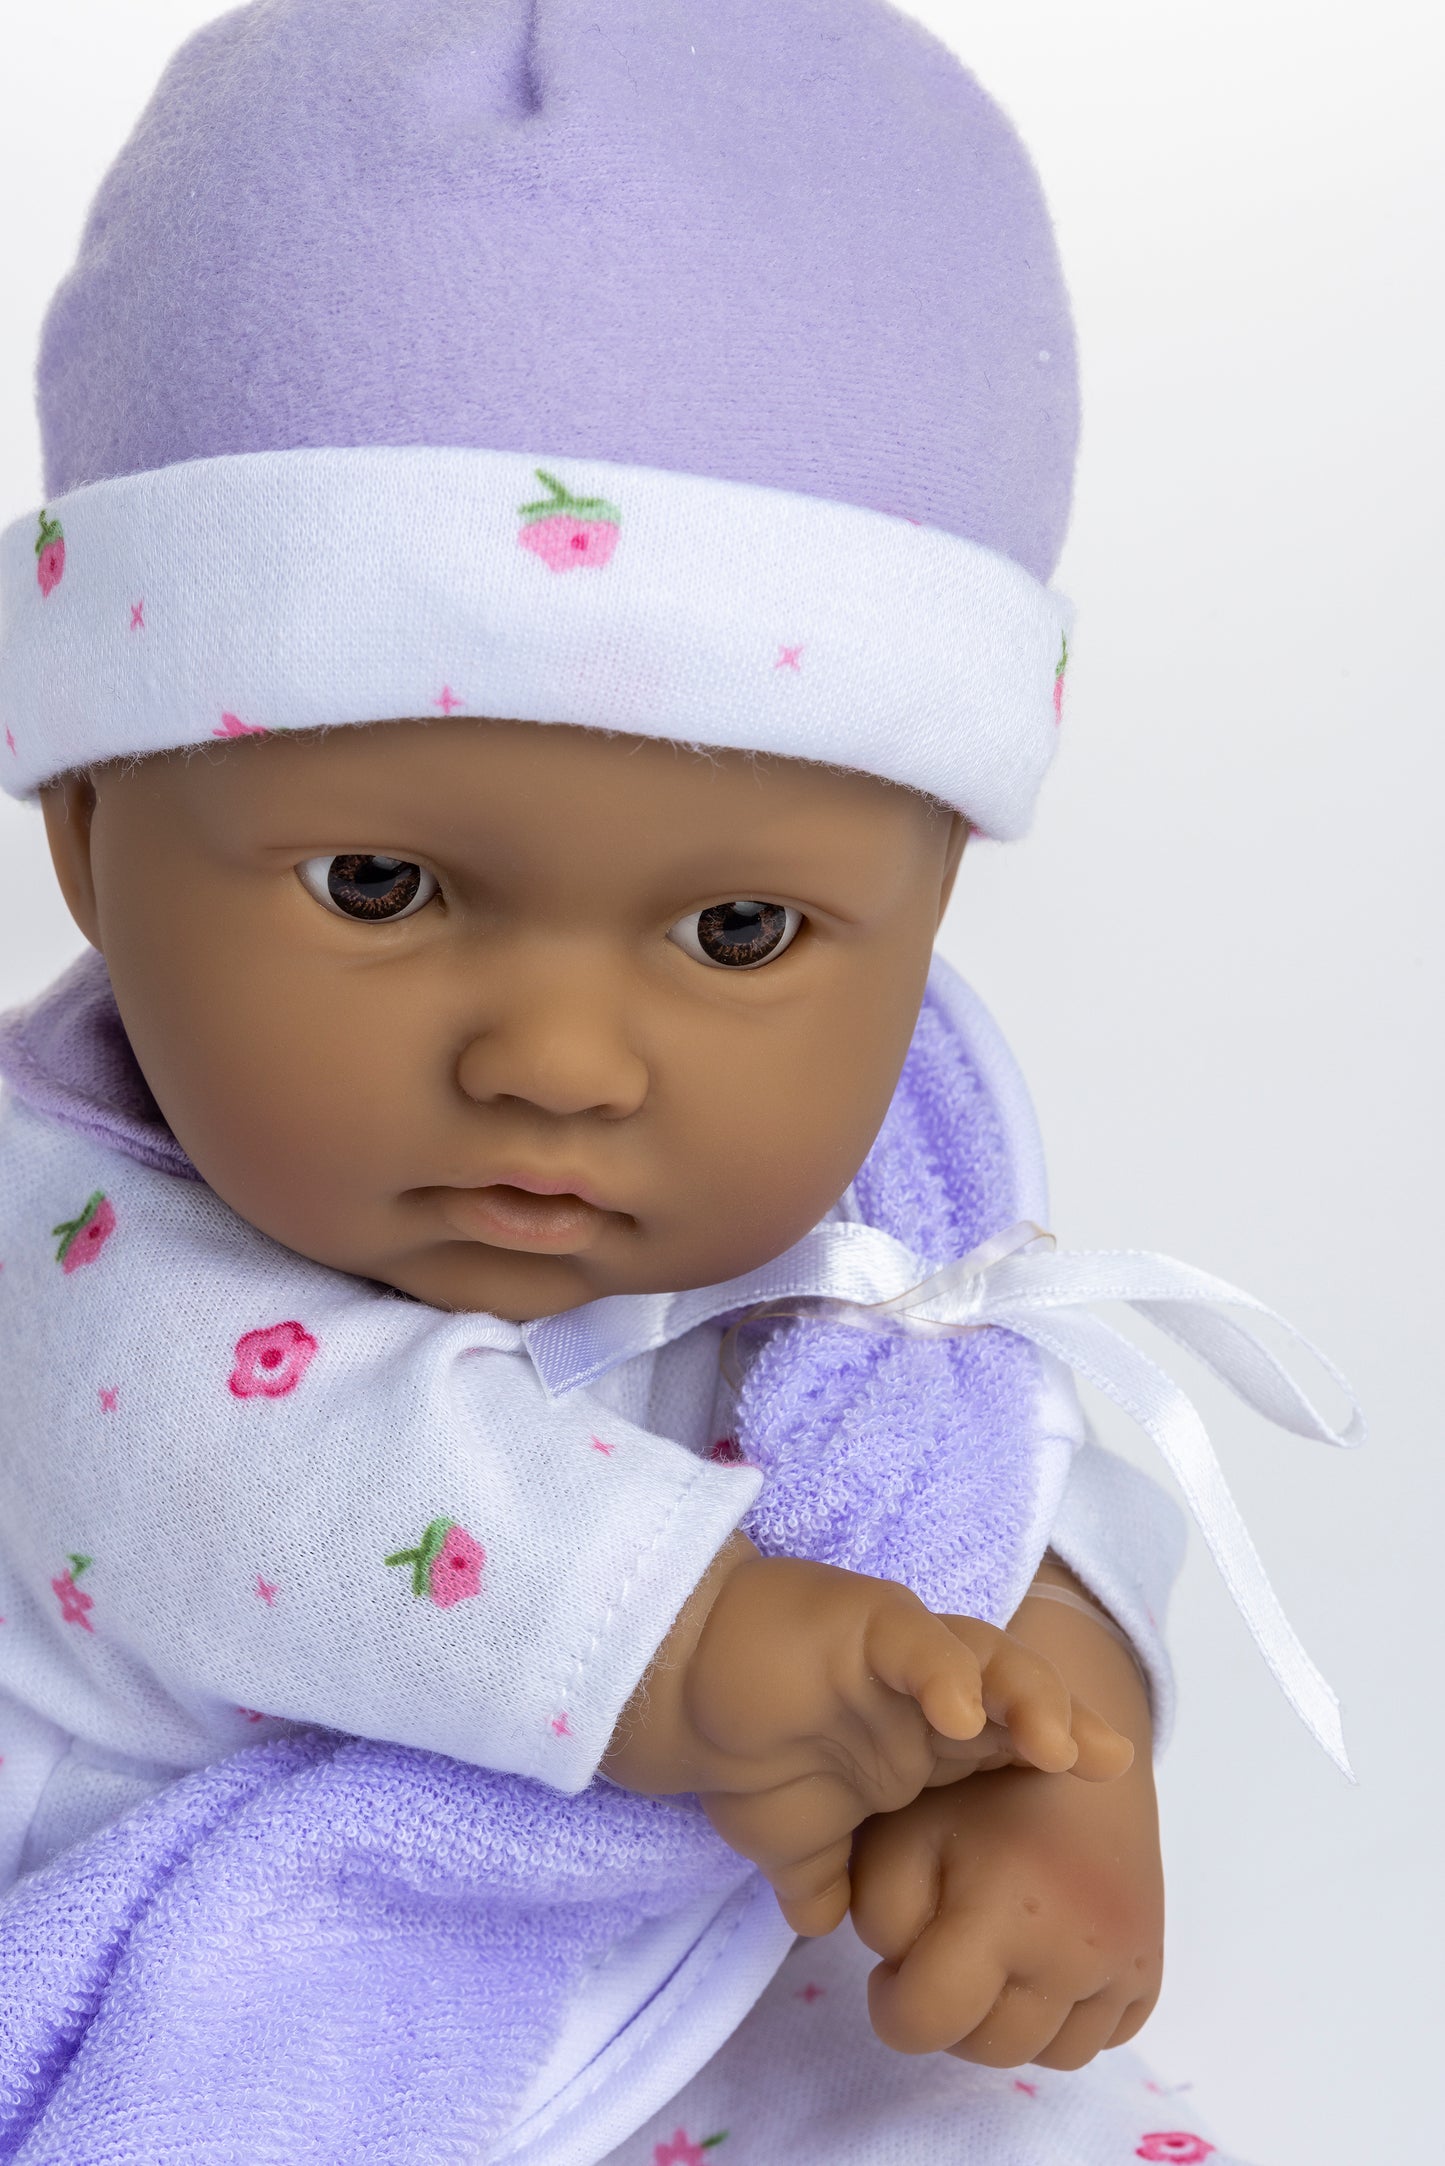 JC Toys, La Baby 11 inch Soft Body Hispanic Baby Doll in Purple Outfit